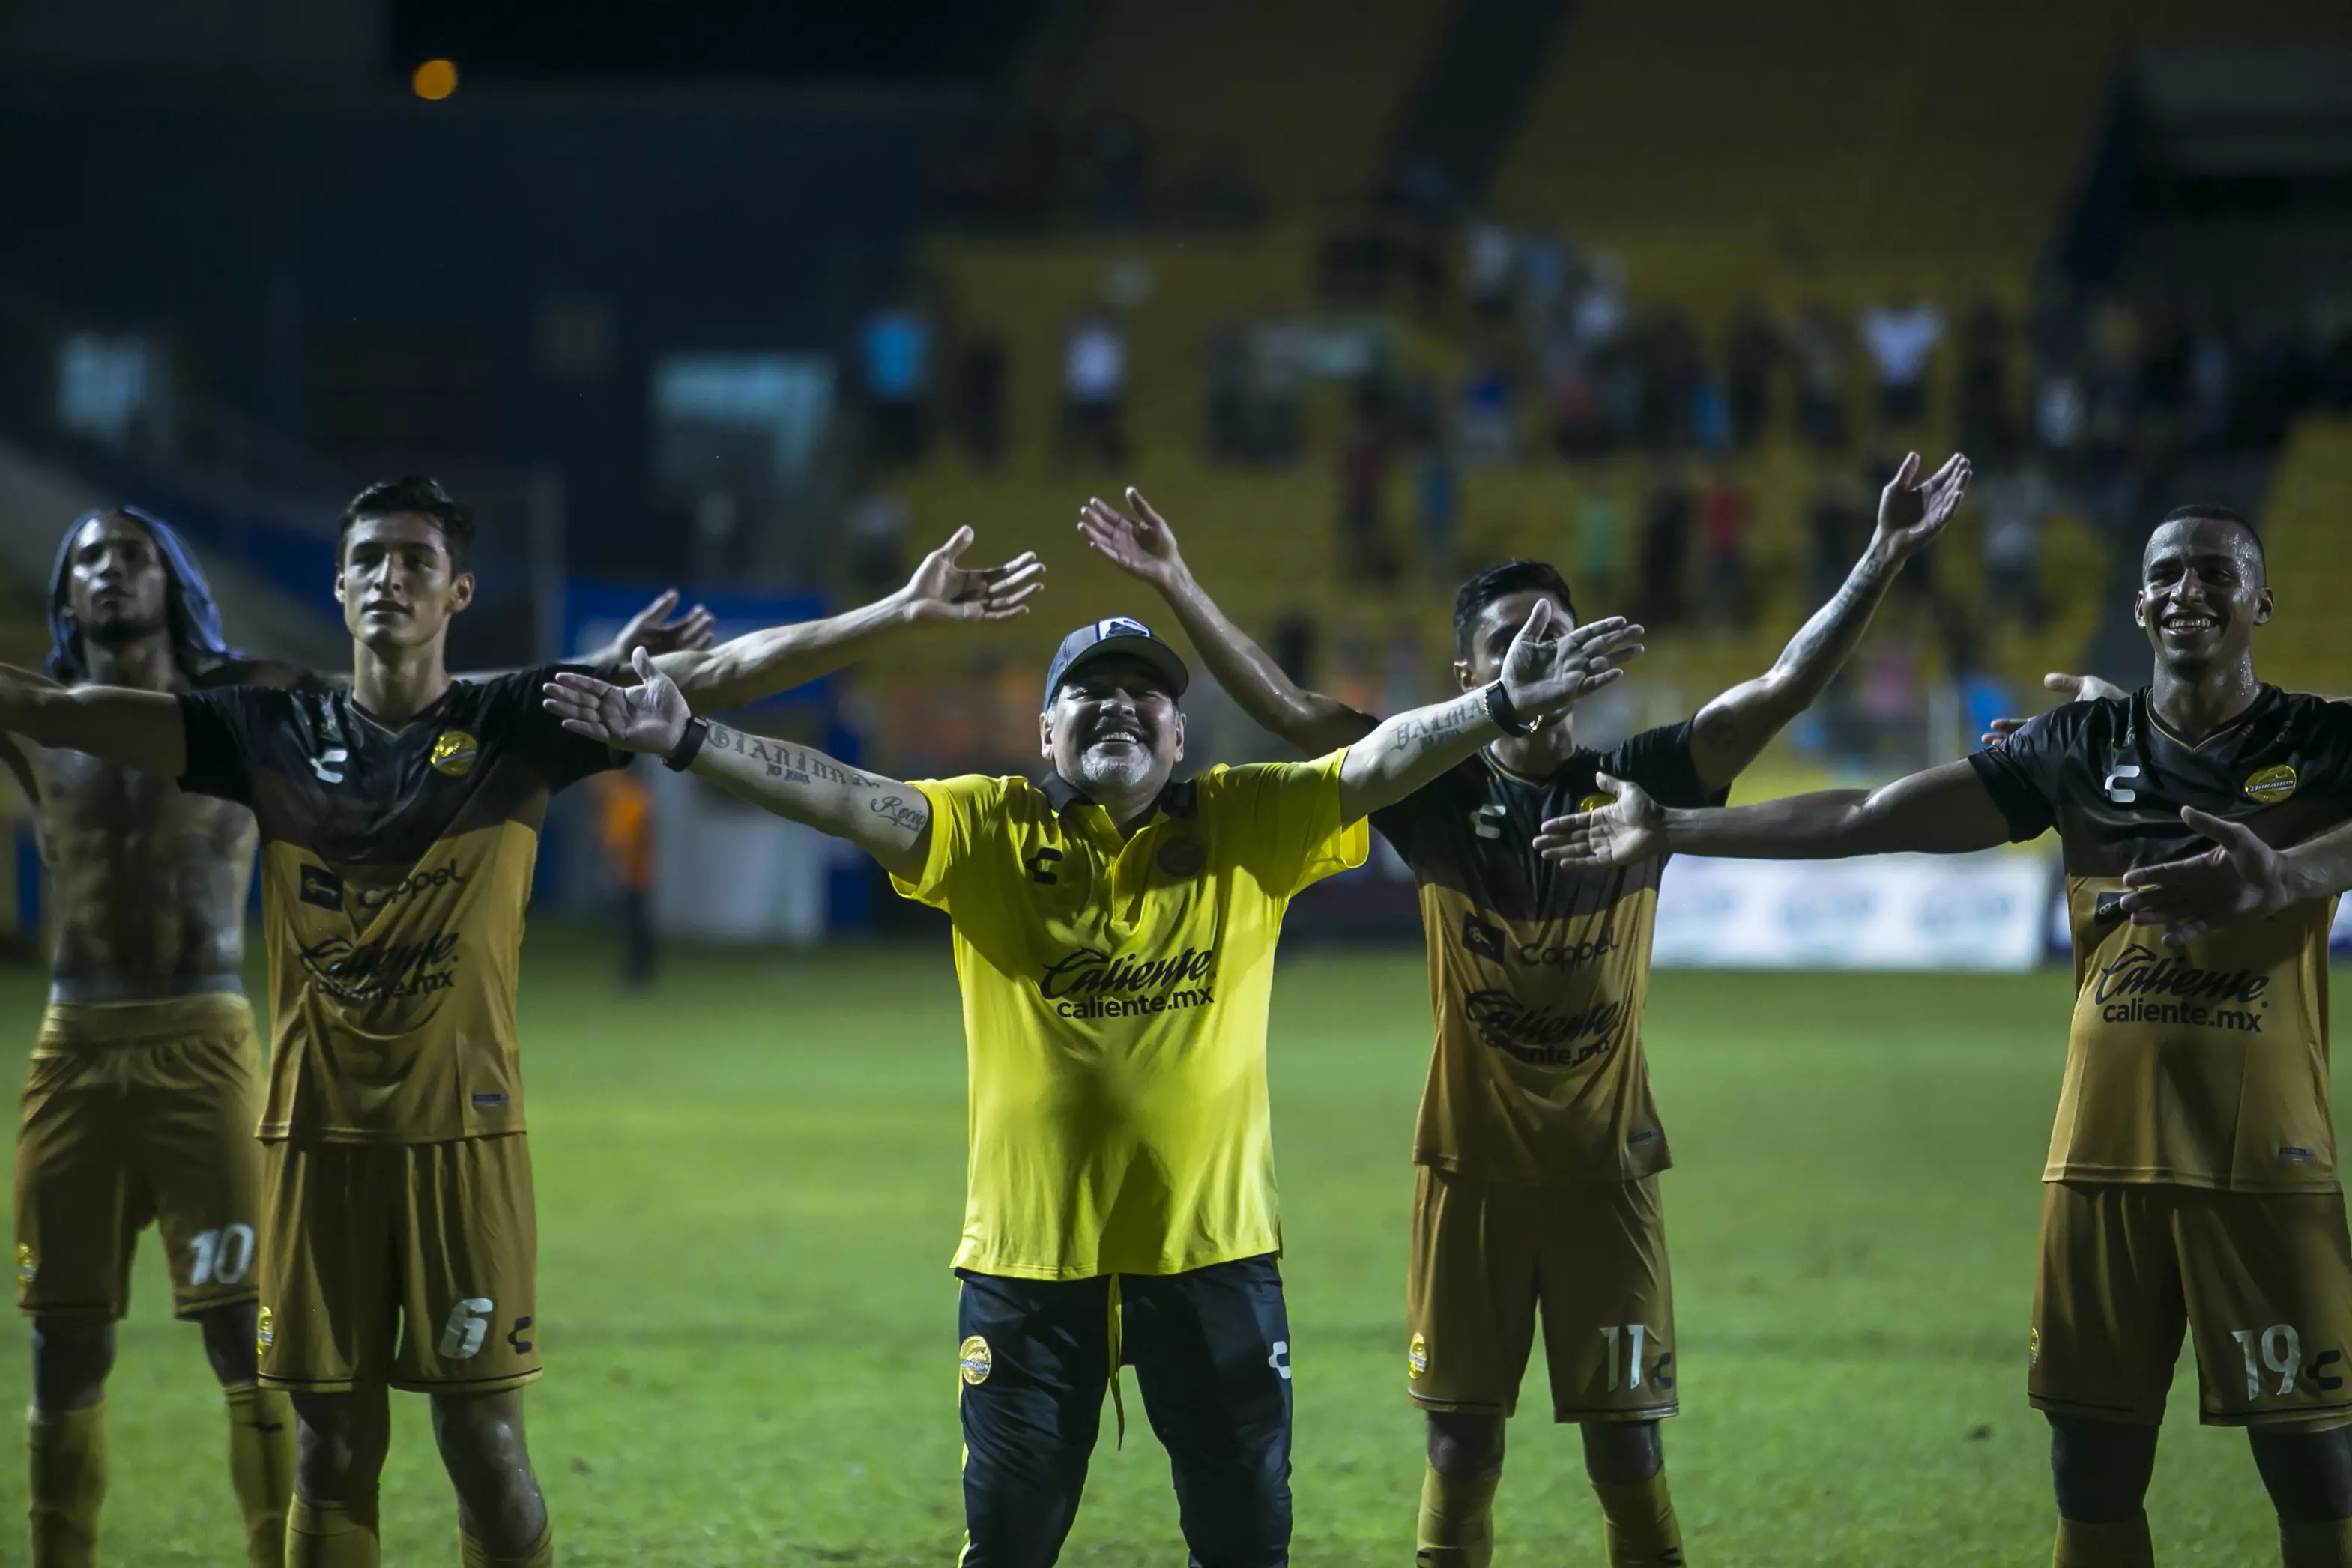 Maradona celebrating with his players in front of fans. Image: PA Images